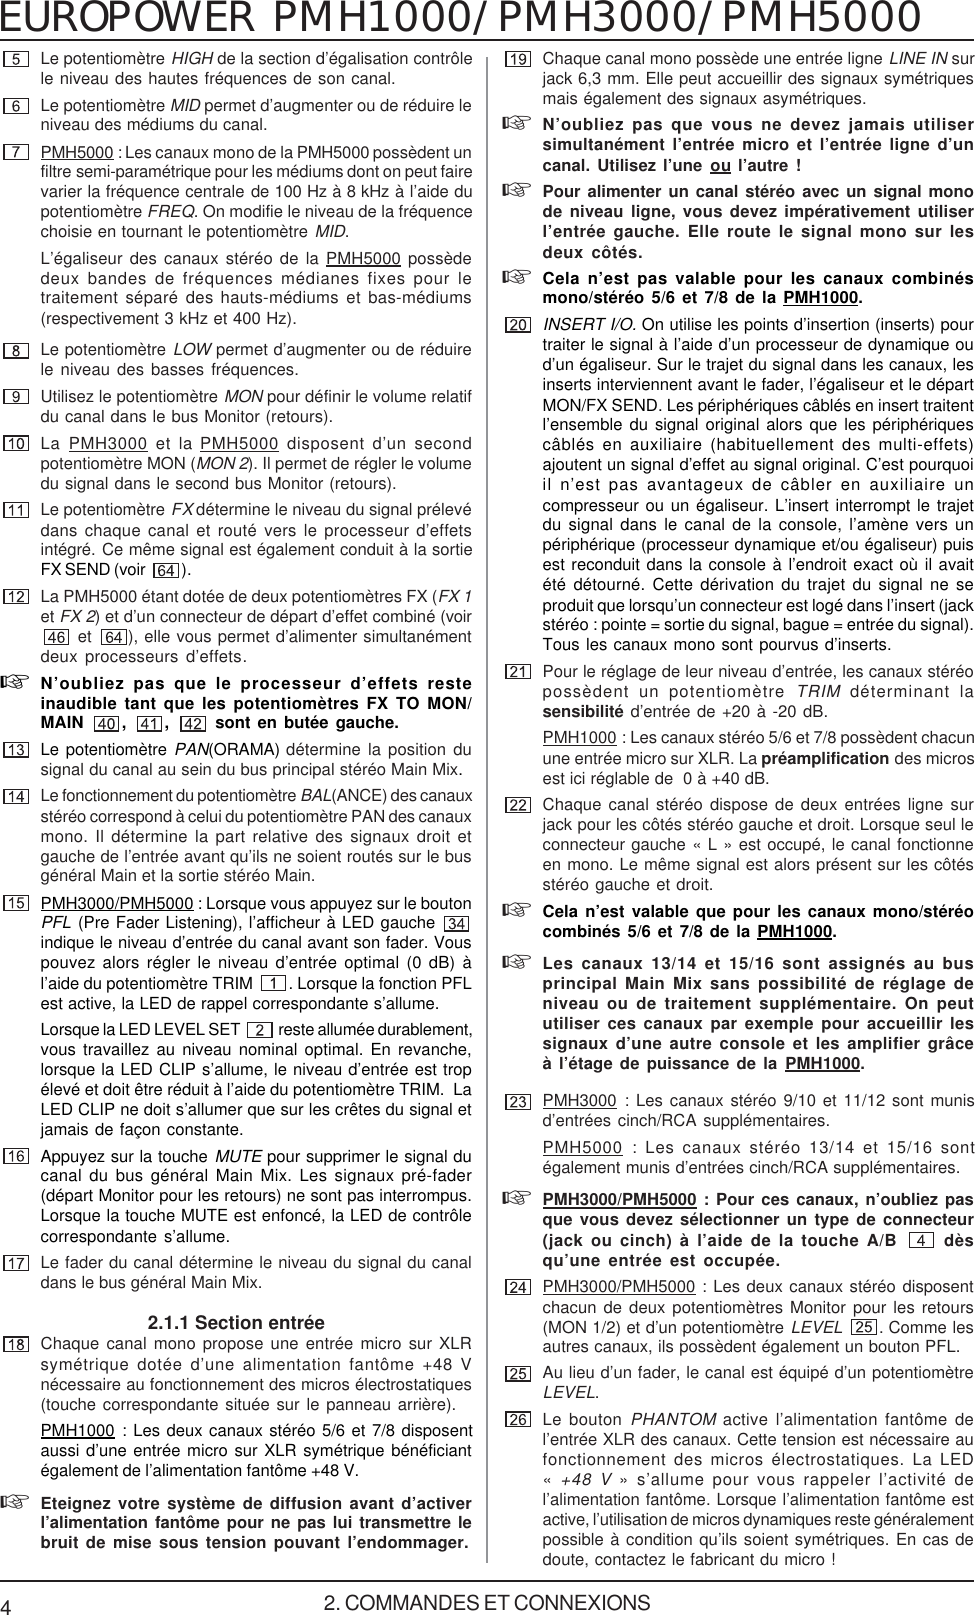 Page 4 of 12 - Behringer PMH1000 User Manual (French) P0115 M FR